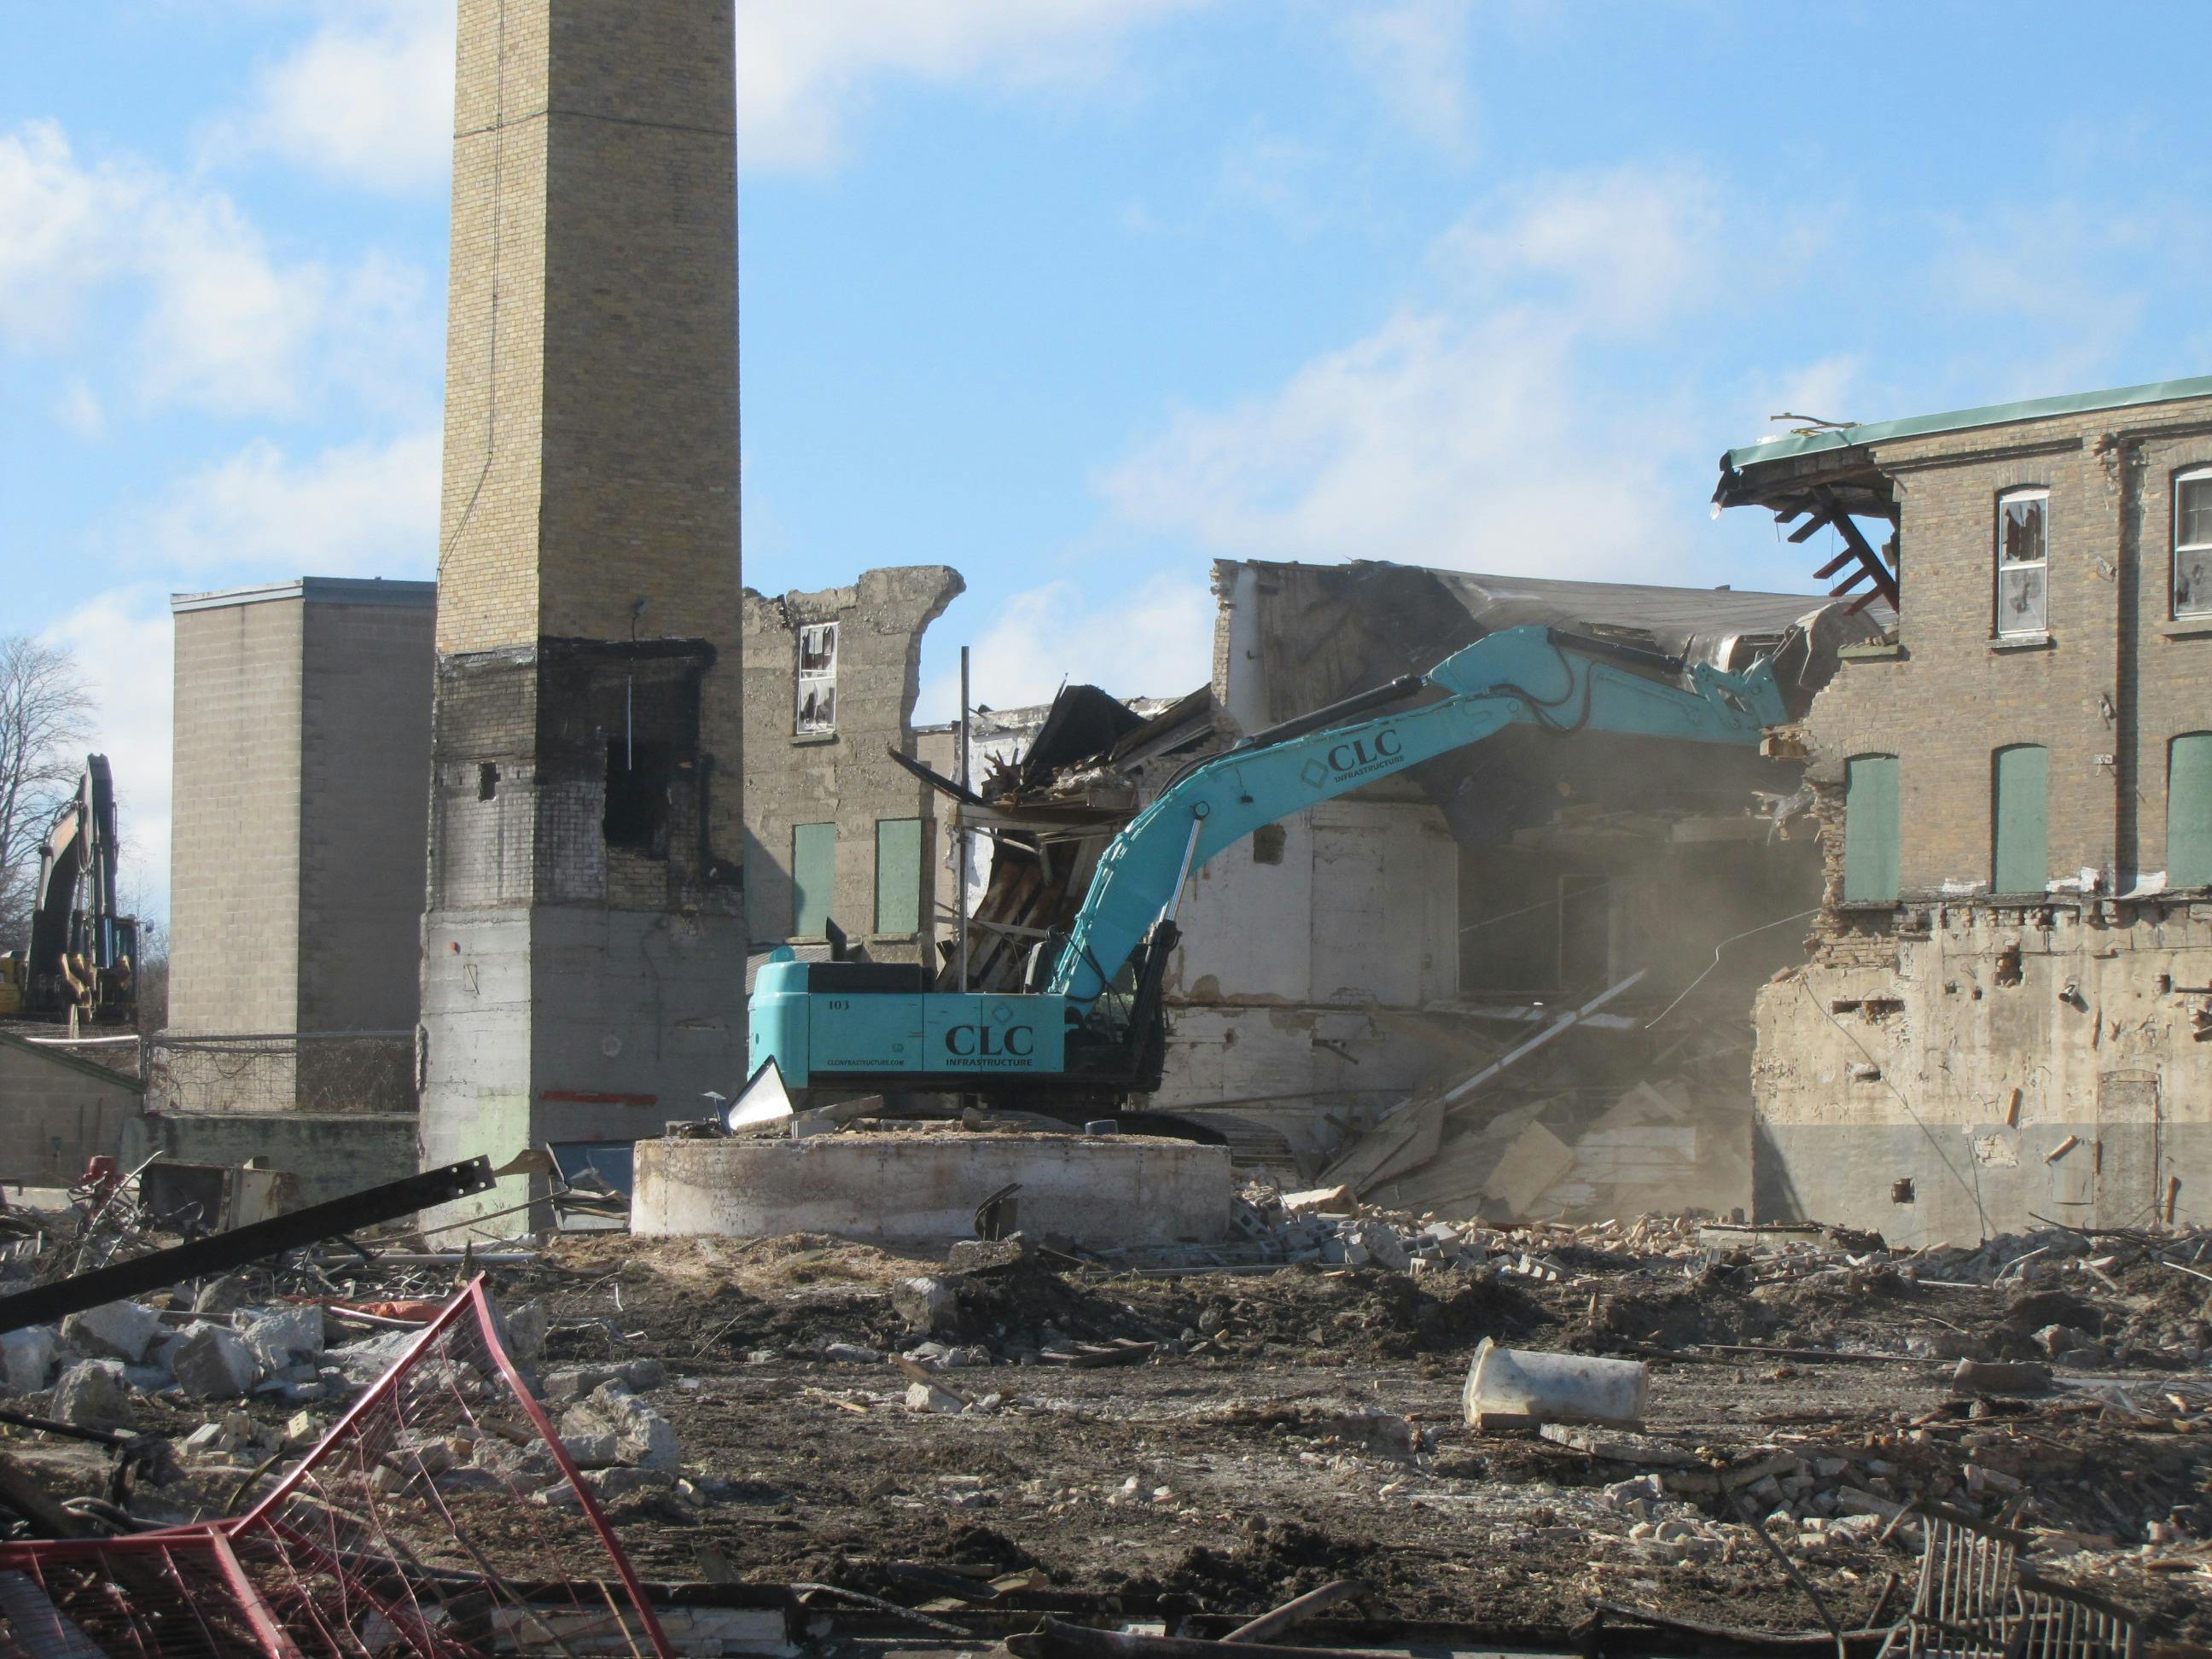 Demolition of Bogdon and Gross - March 12, 2021